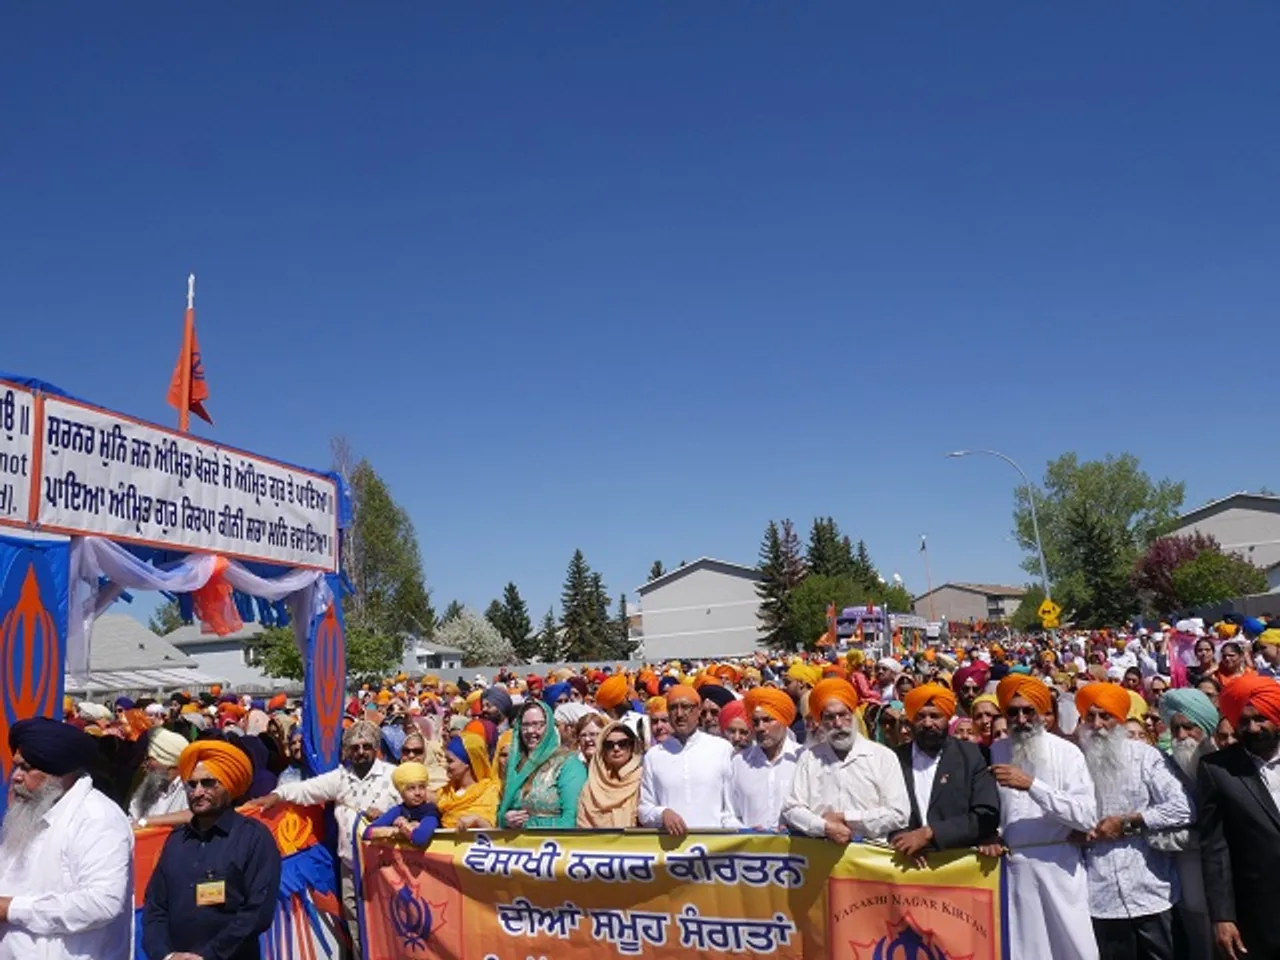 Many participated in Edmonton's annual Khalsa Day parade